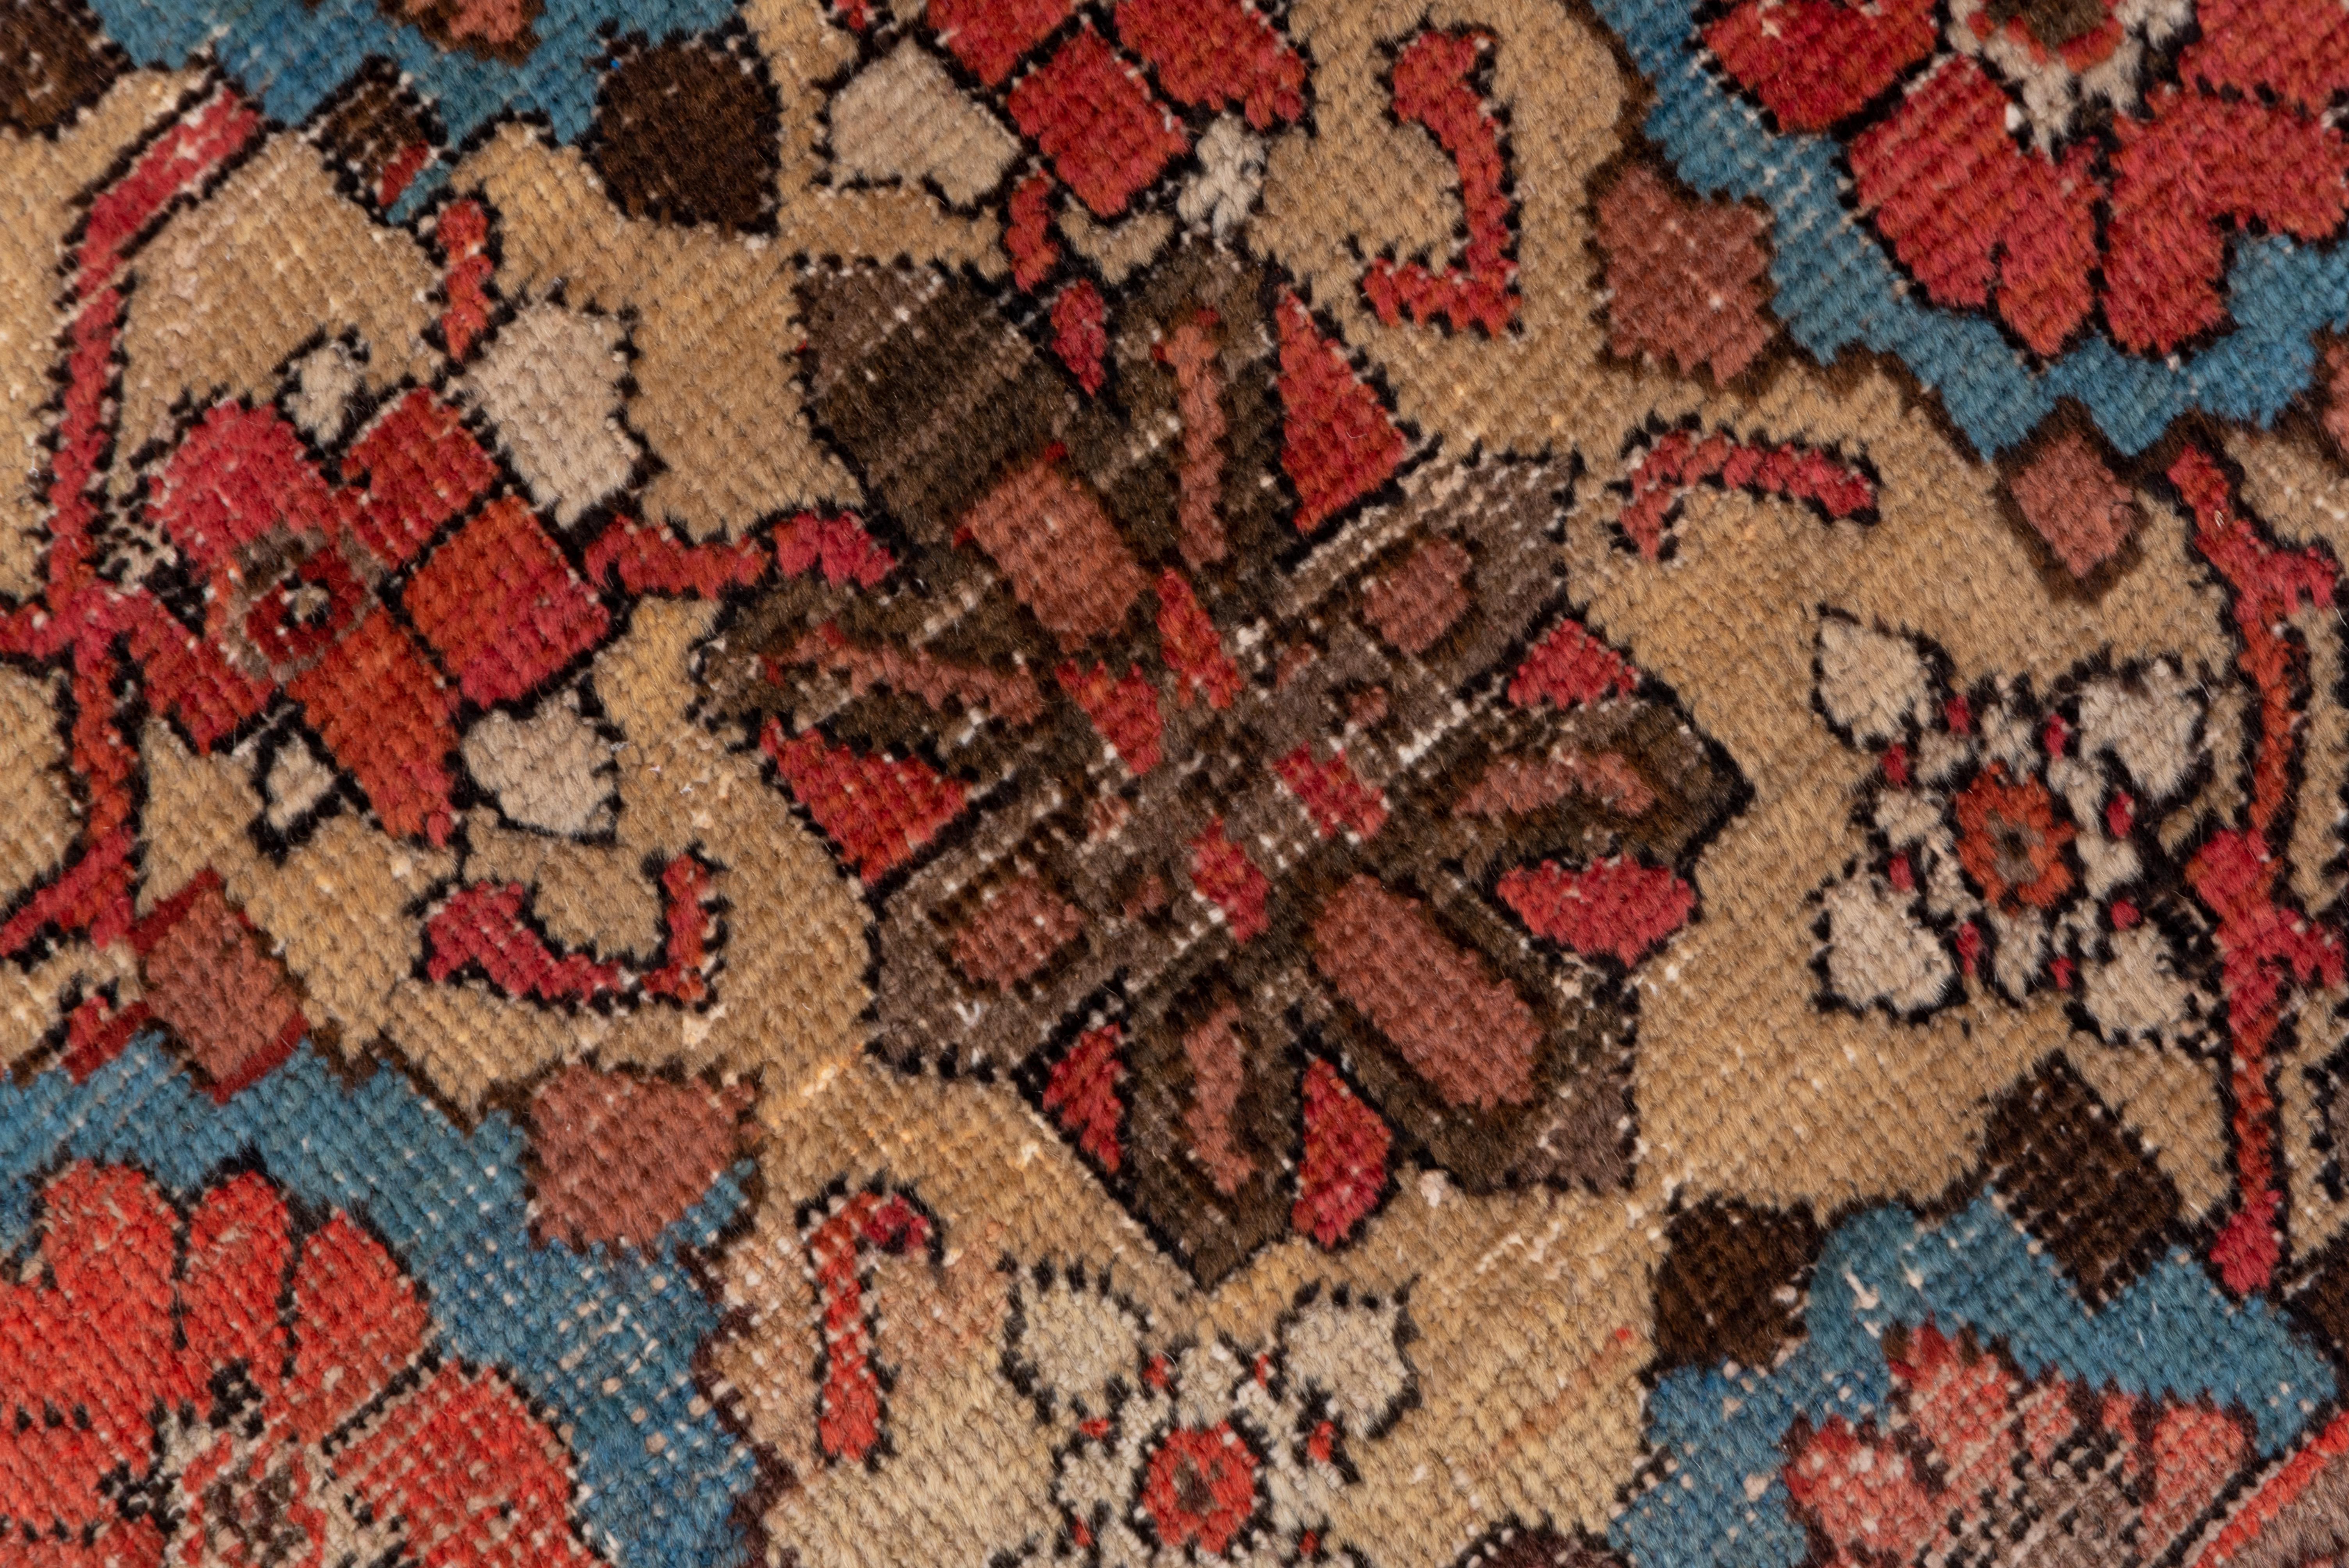 This antique west Persian village carpet presents an iconic allover Mina Khani rosette lattice on a sandy-straw field, with accents in light blue, red, teal, rose and eggshell. The pattern moves and changes rather than remaining fixed, a real plus.